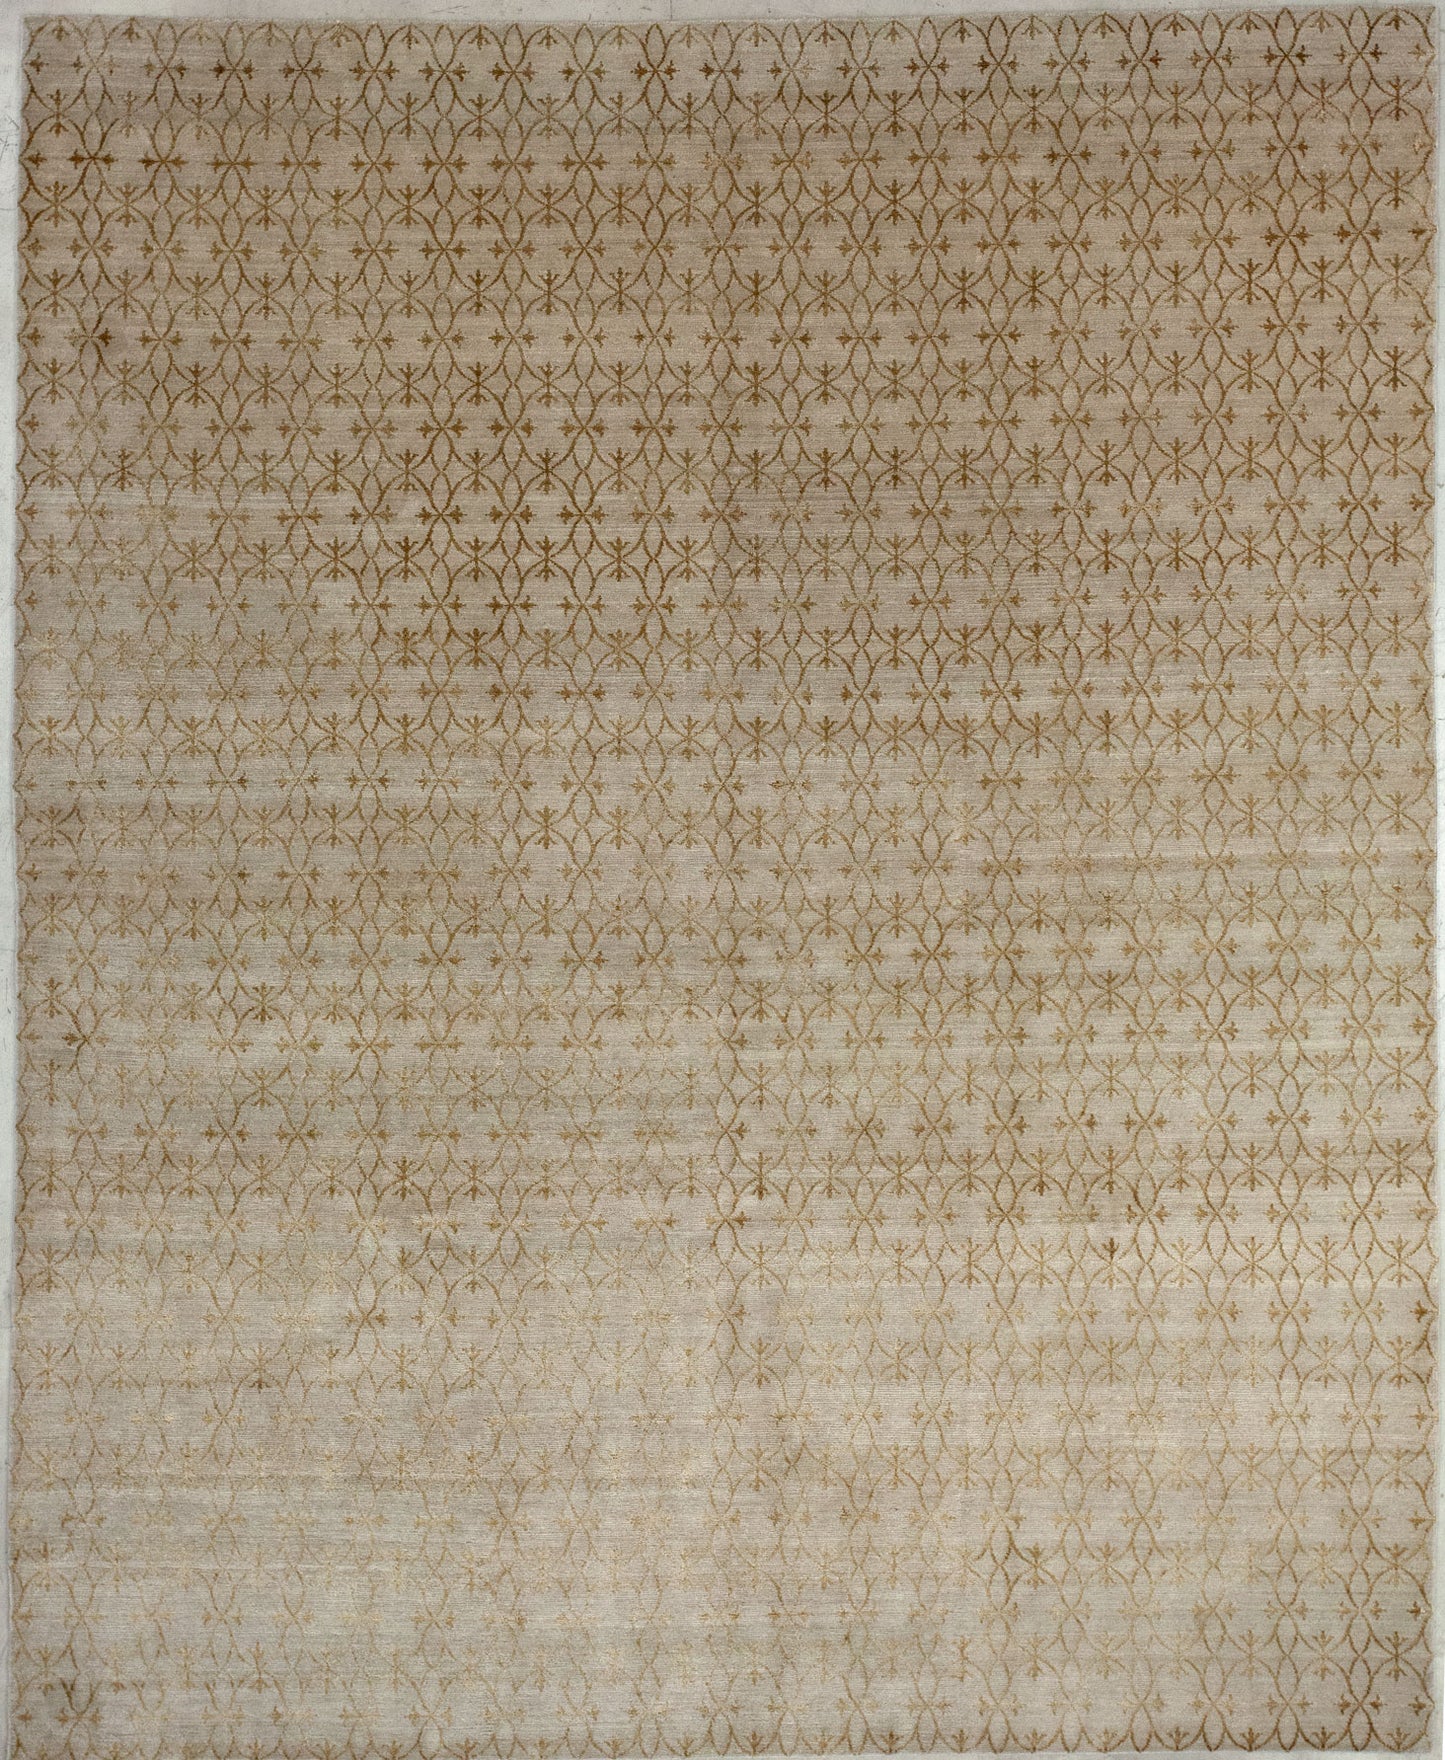 Snazzy rug comes with beige background and brown pattern, which are swirl drops next to each other.